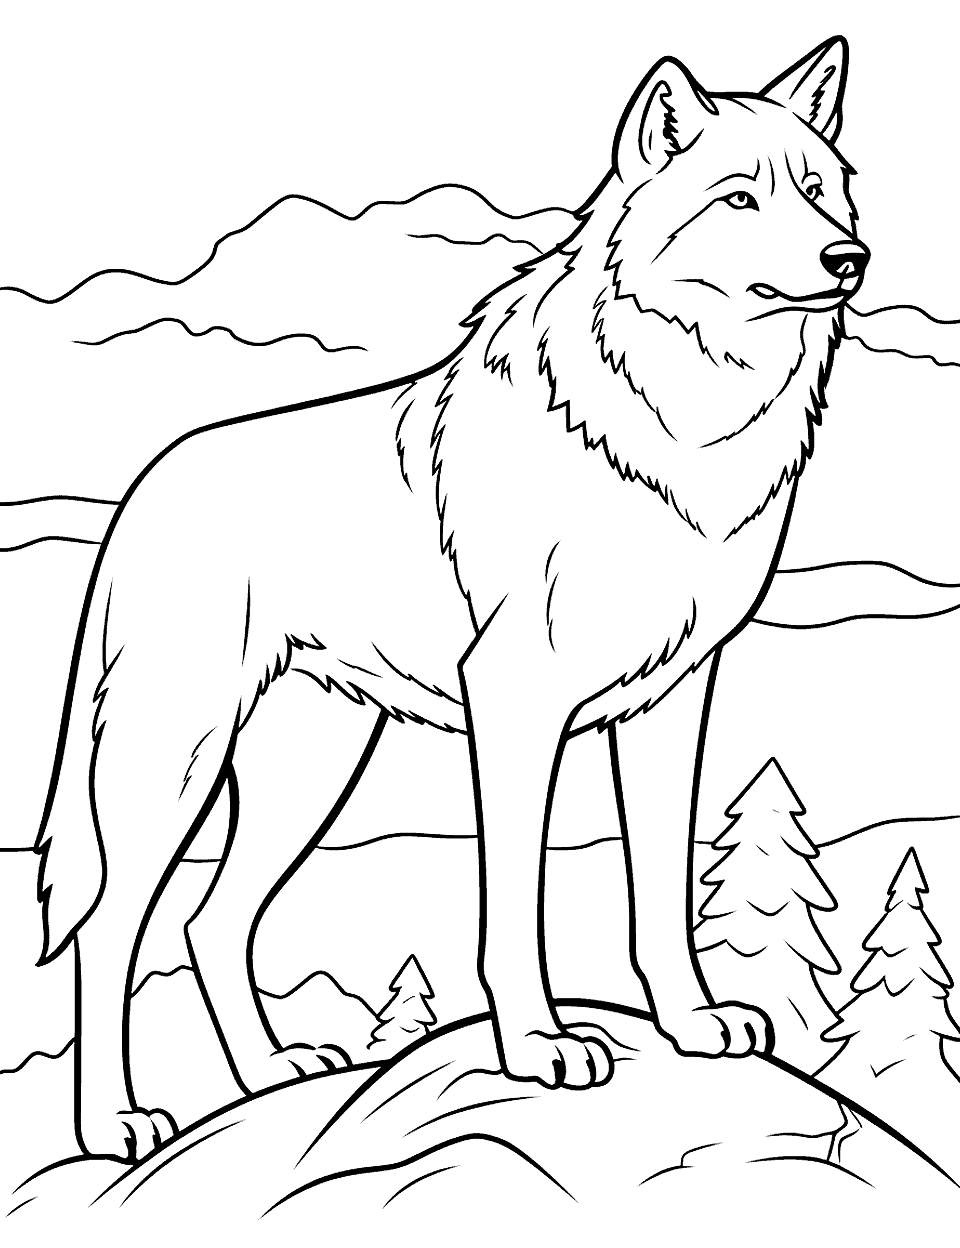 Mountain Wolf Coloring Page - A wolf standing on a mountain peak.